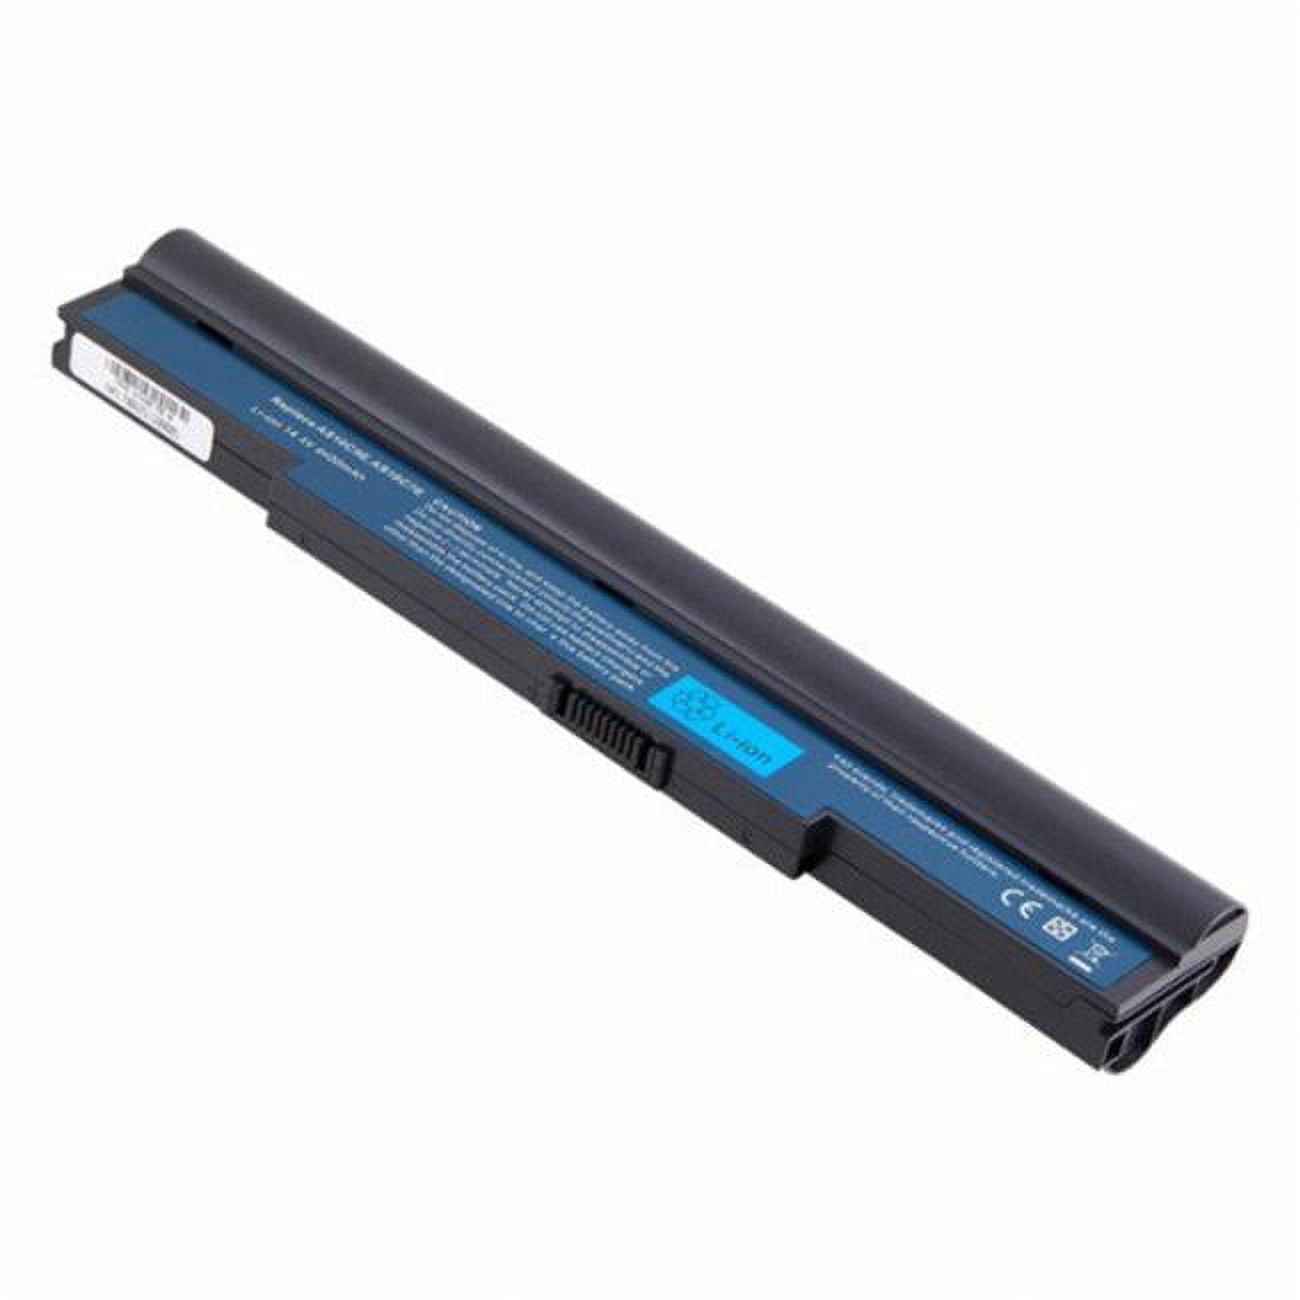 Picture of Denaq NM-AS10C5E-8 8-Cell Lithium-Ion Battery for Acer Aspire 5943G & 5950G Laptops